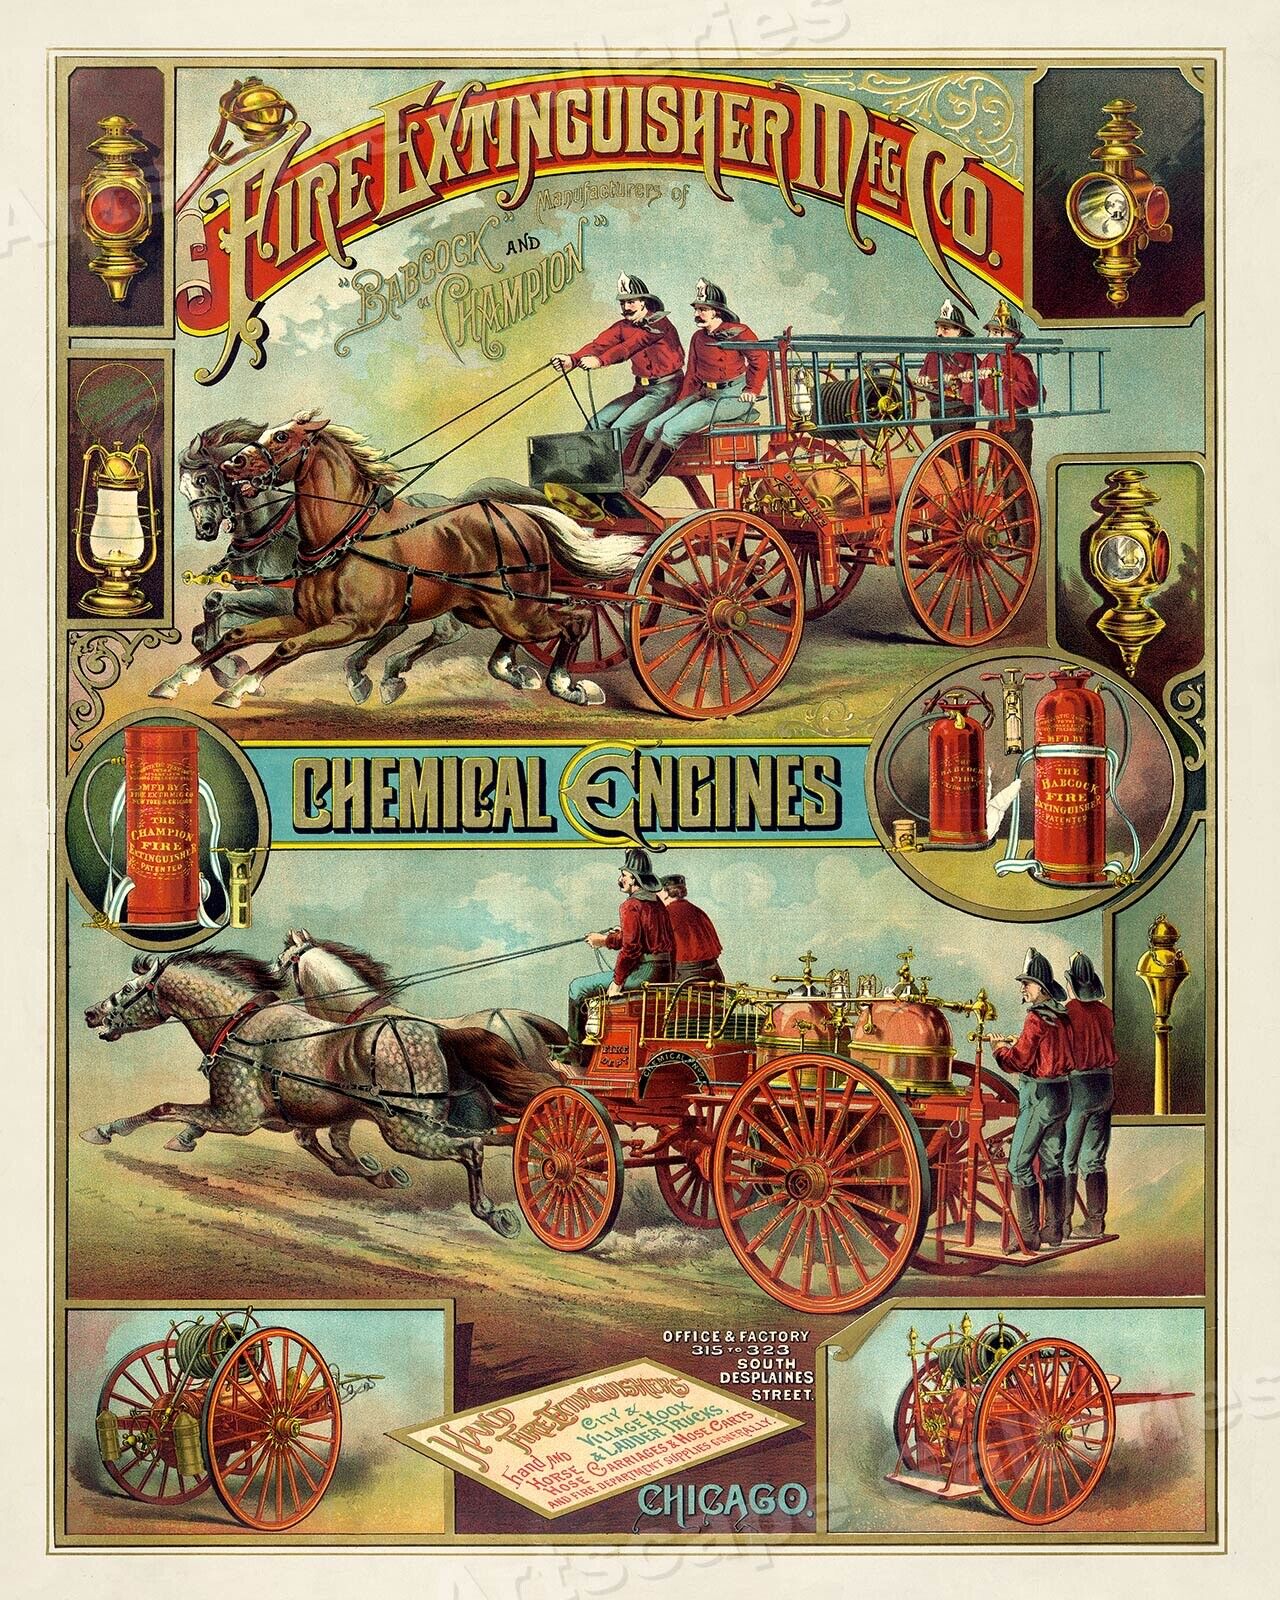 1880s Fire Engine Vintage Style Firefighter Advertising Poster - 24x30